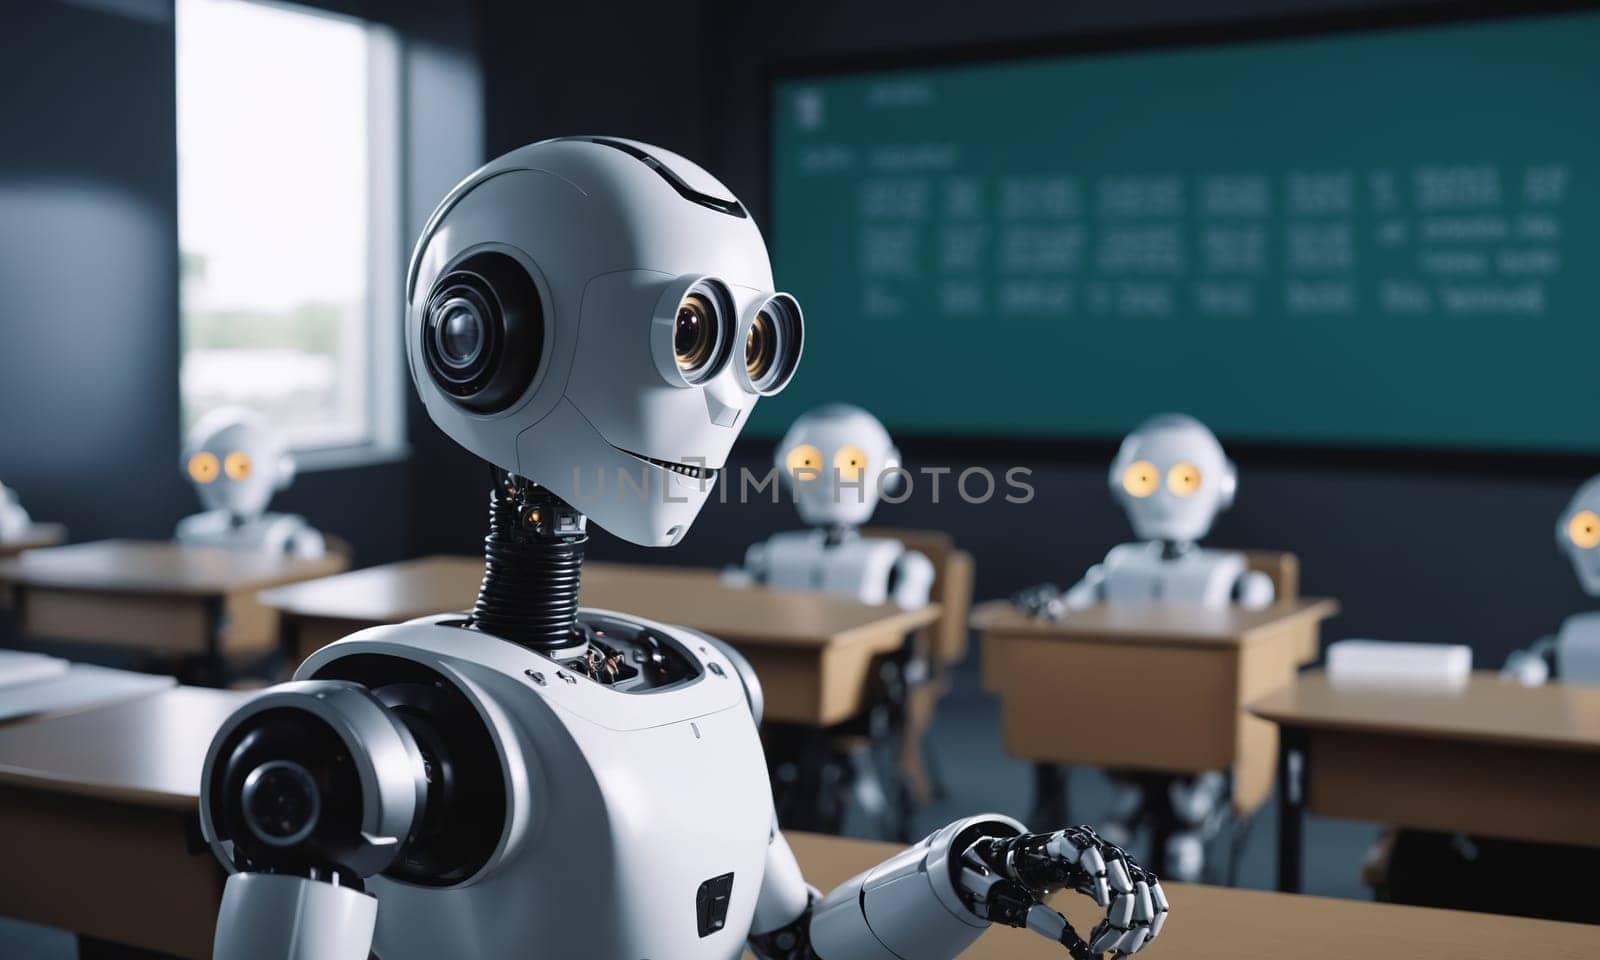 A robot presents in a classroom filled with students and cameras by Andre1ns